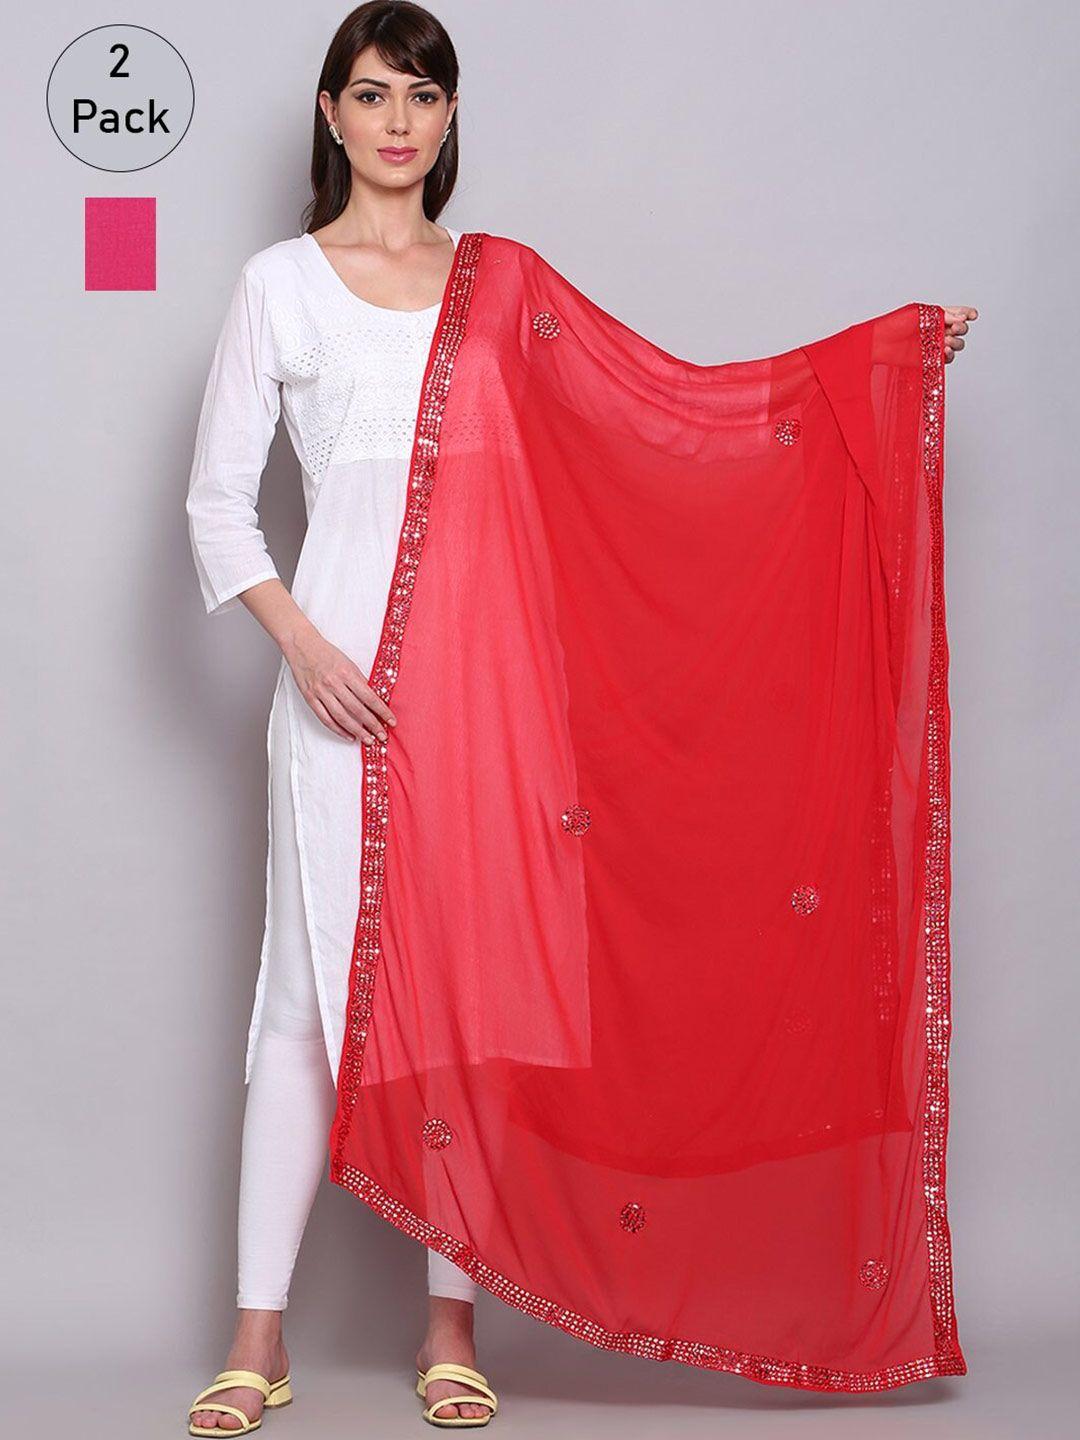 miaz-lifestyle-pack-of-2-pink-&-red-ethnic-motifs-dupatta-with-mirror-work